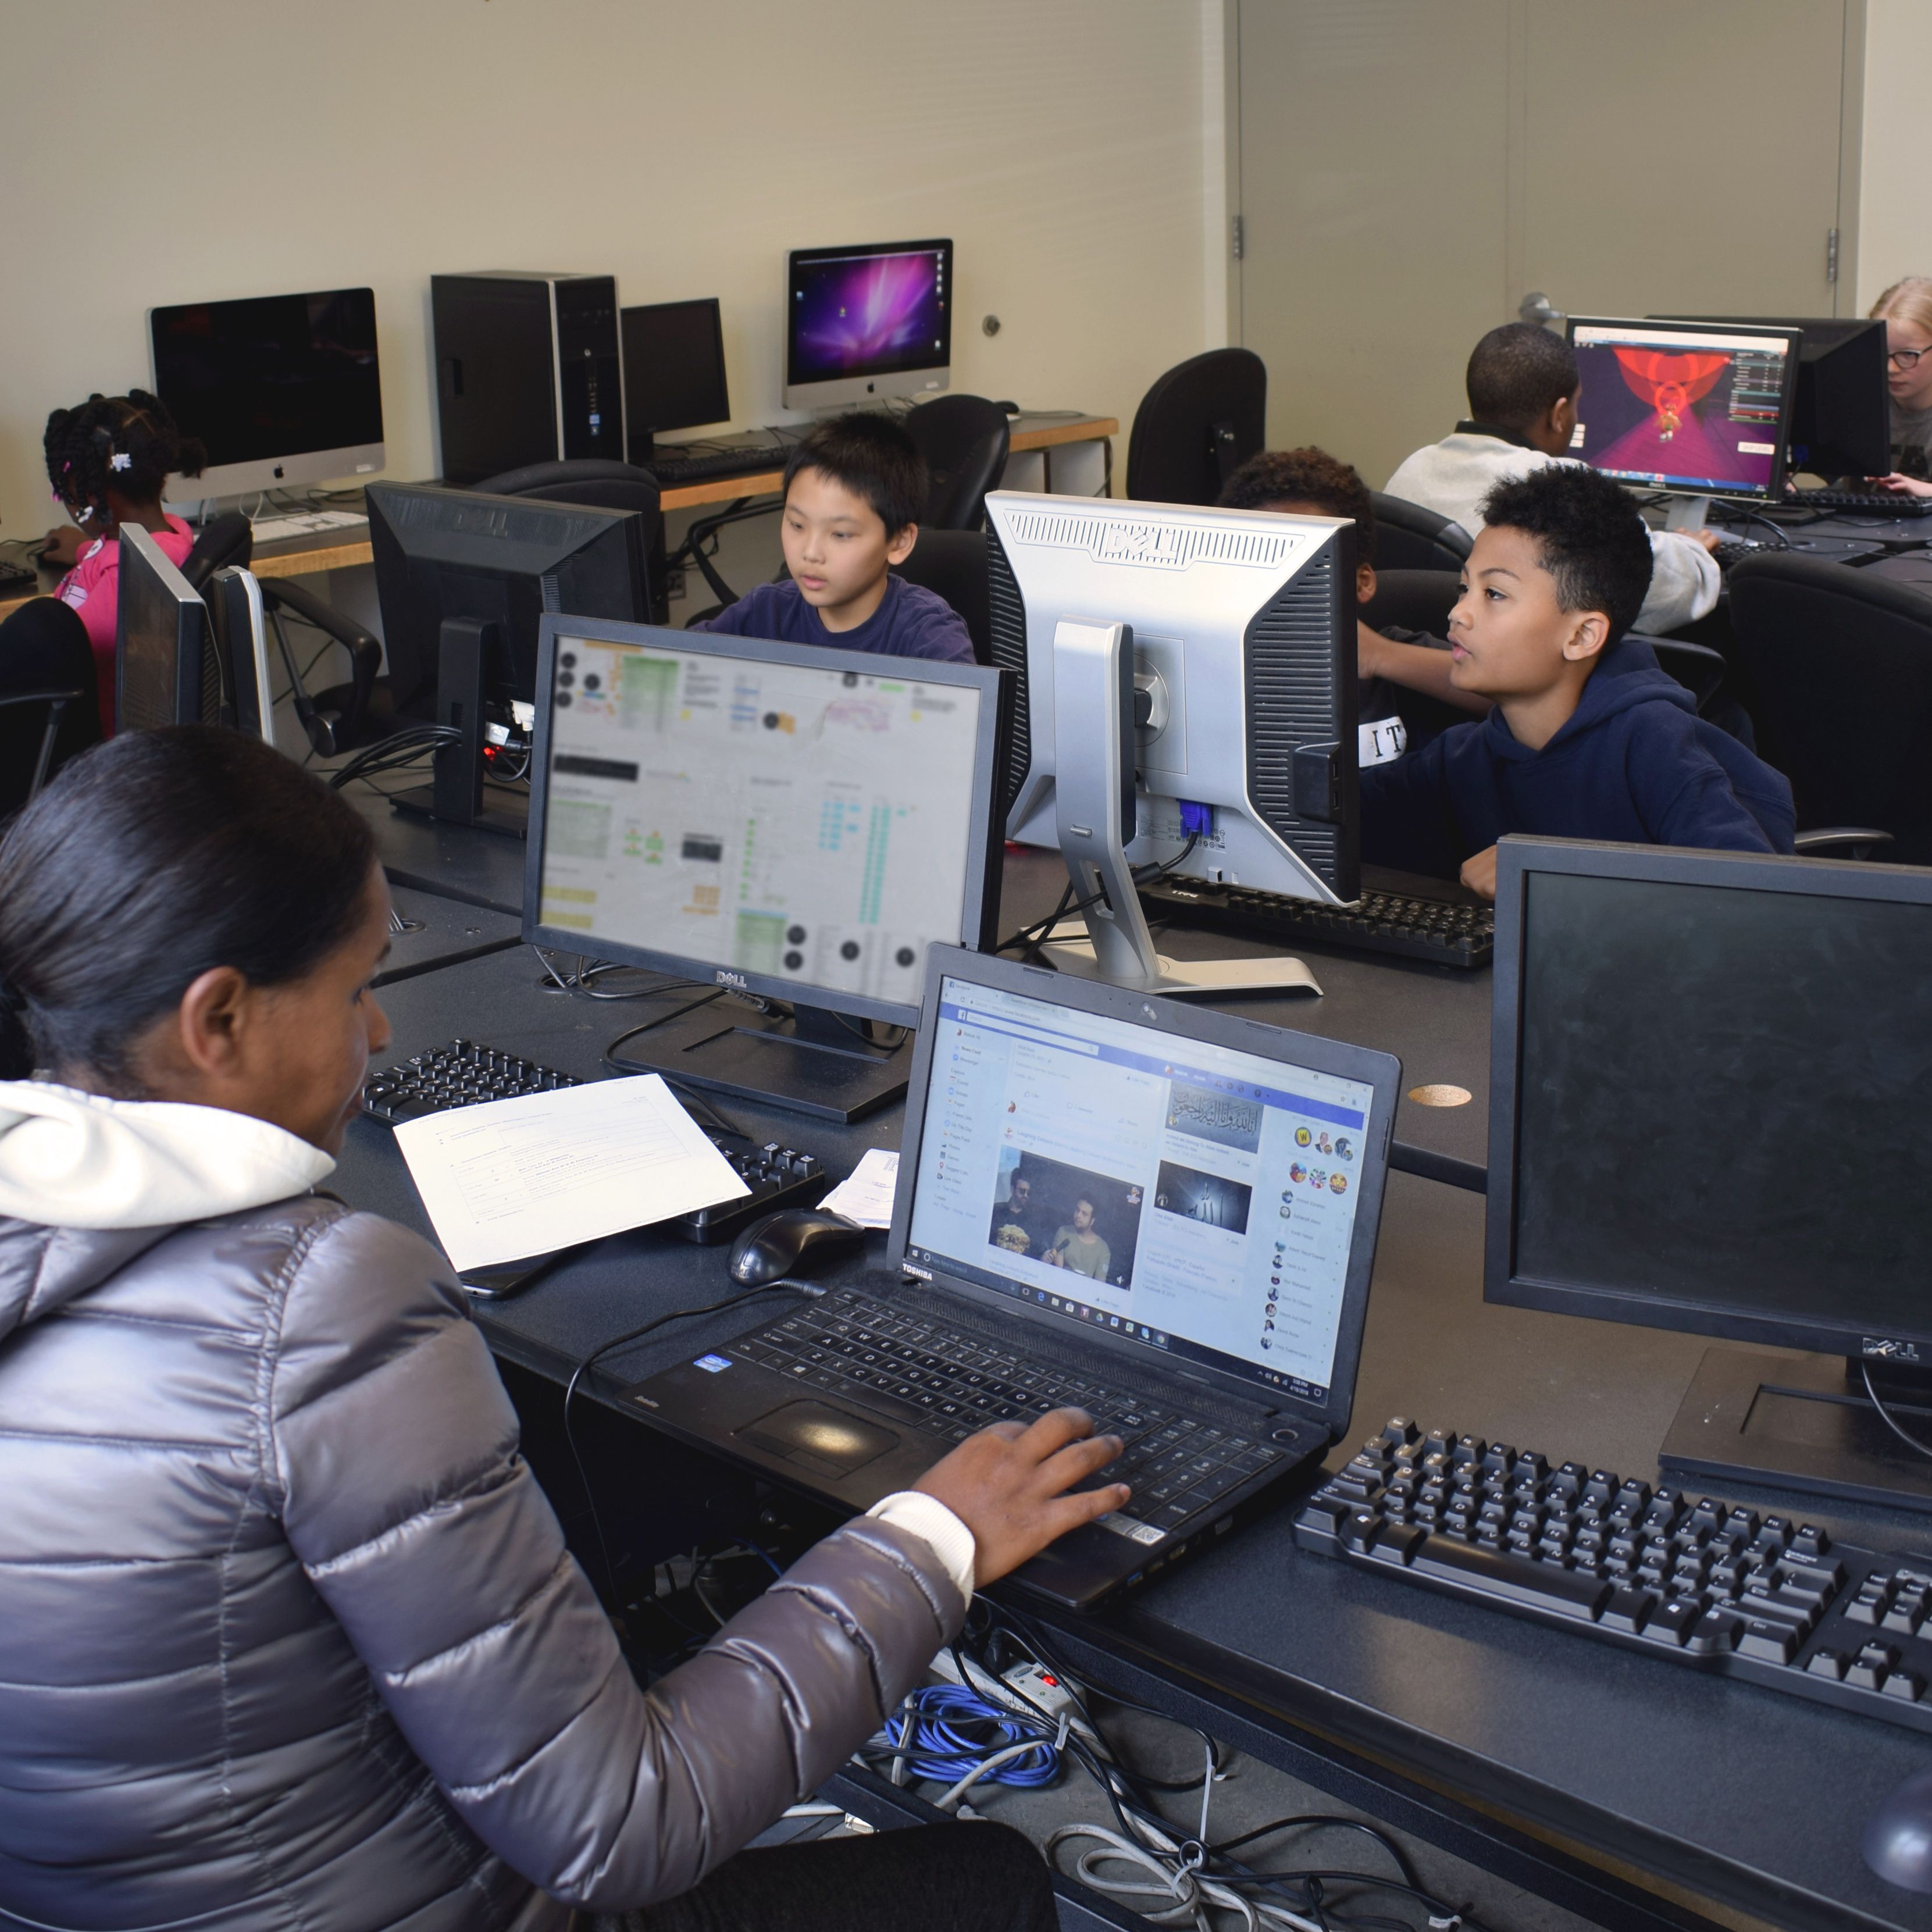 Youth using computers in a group setting